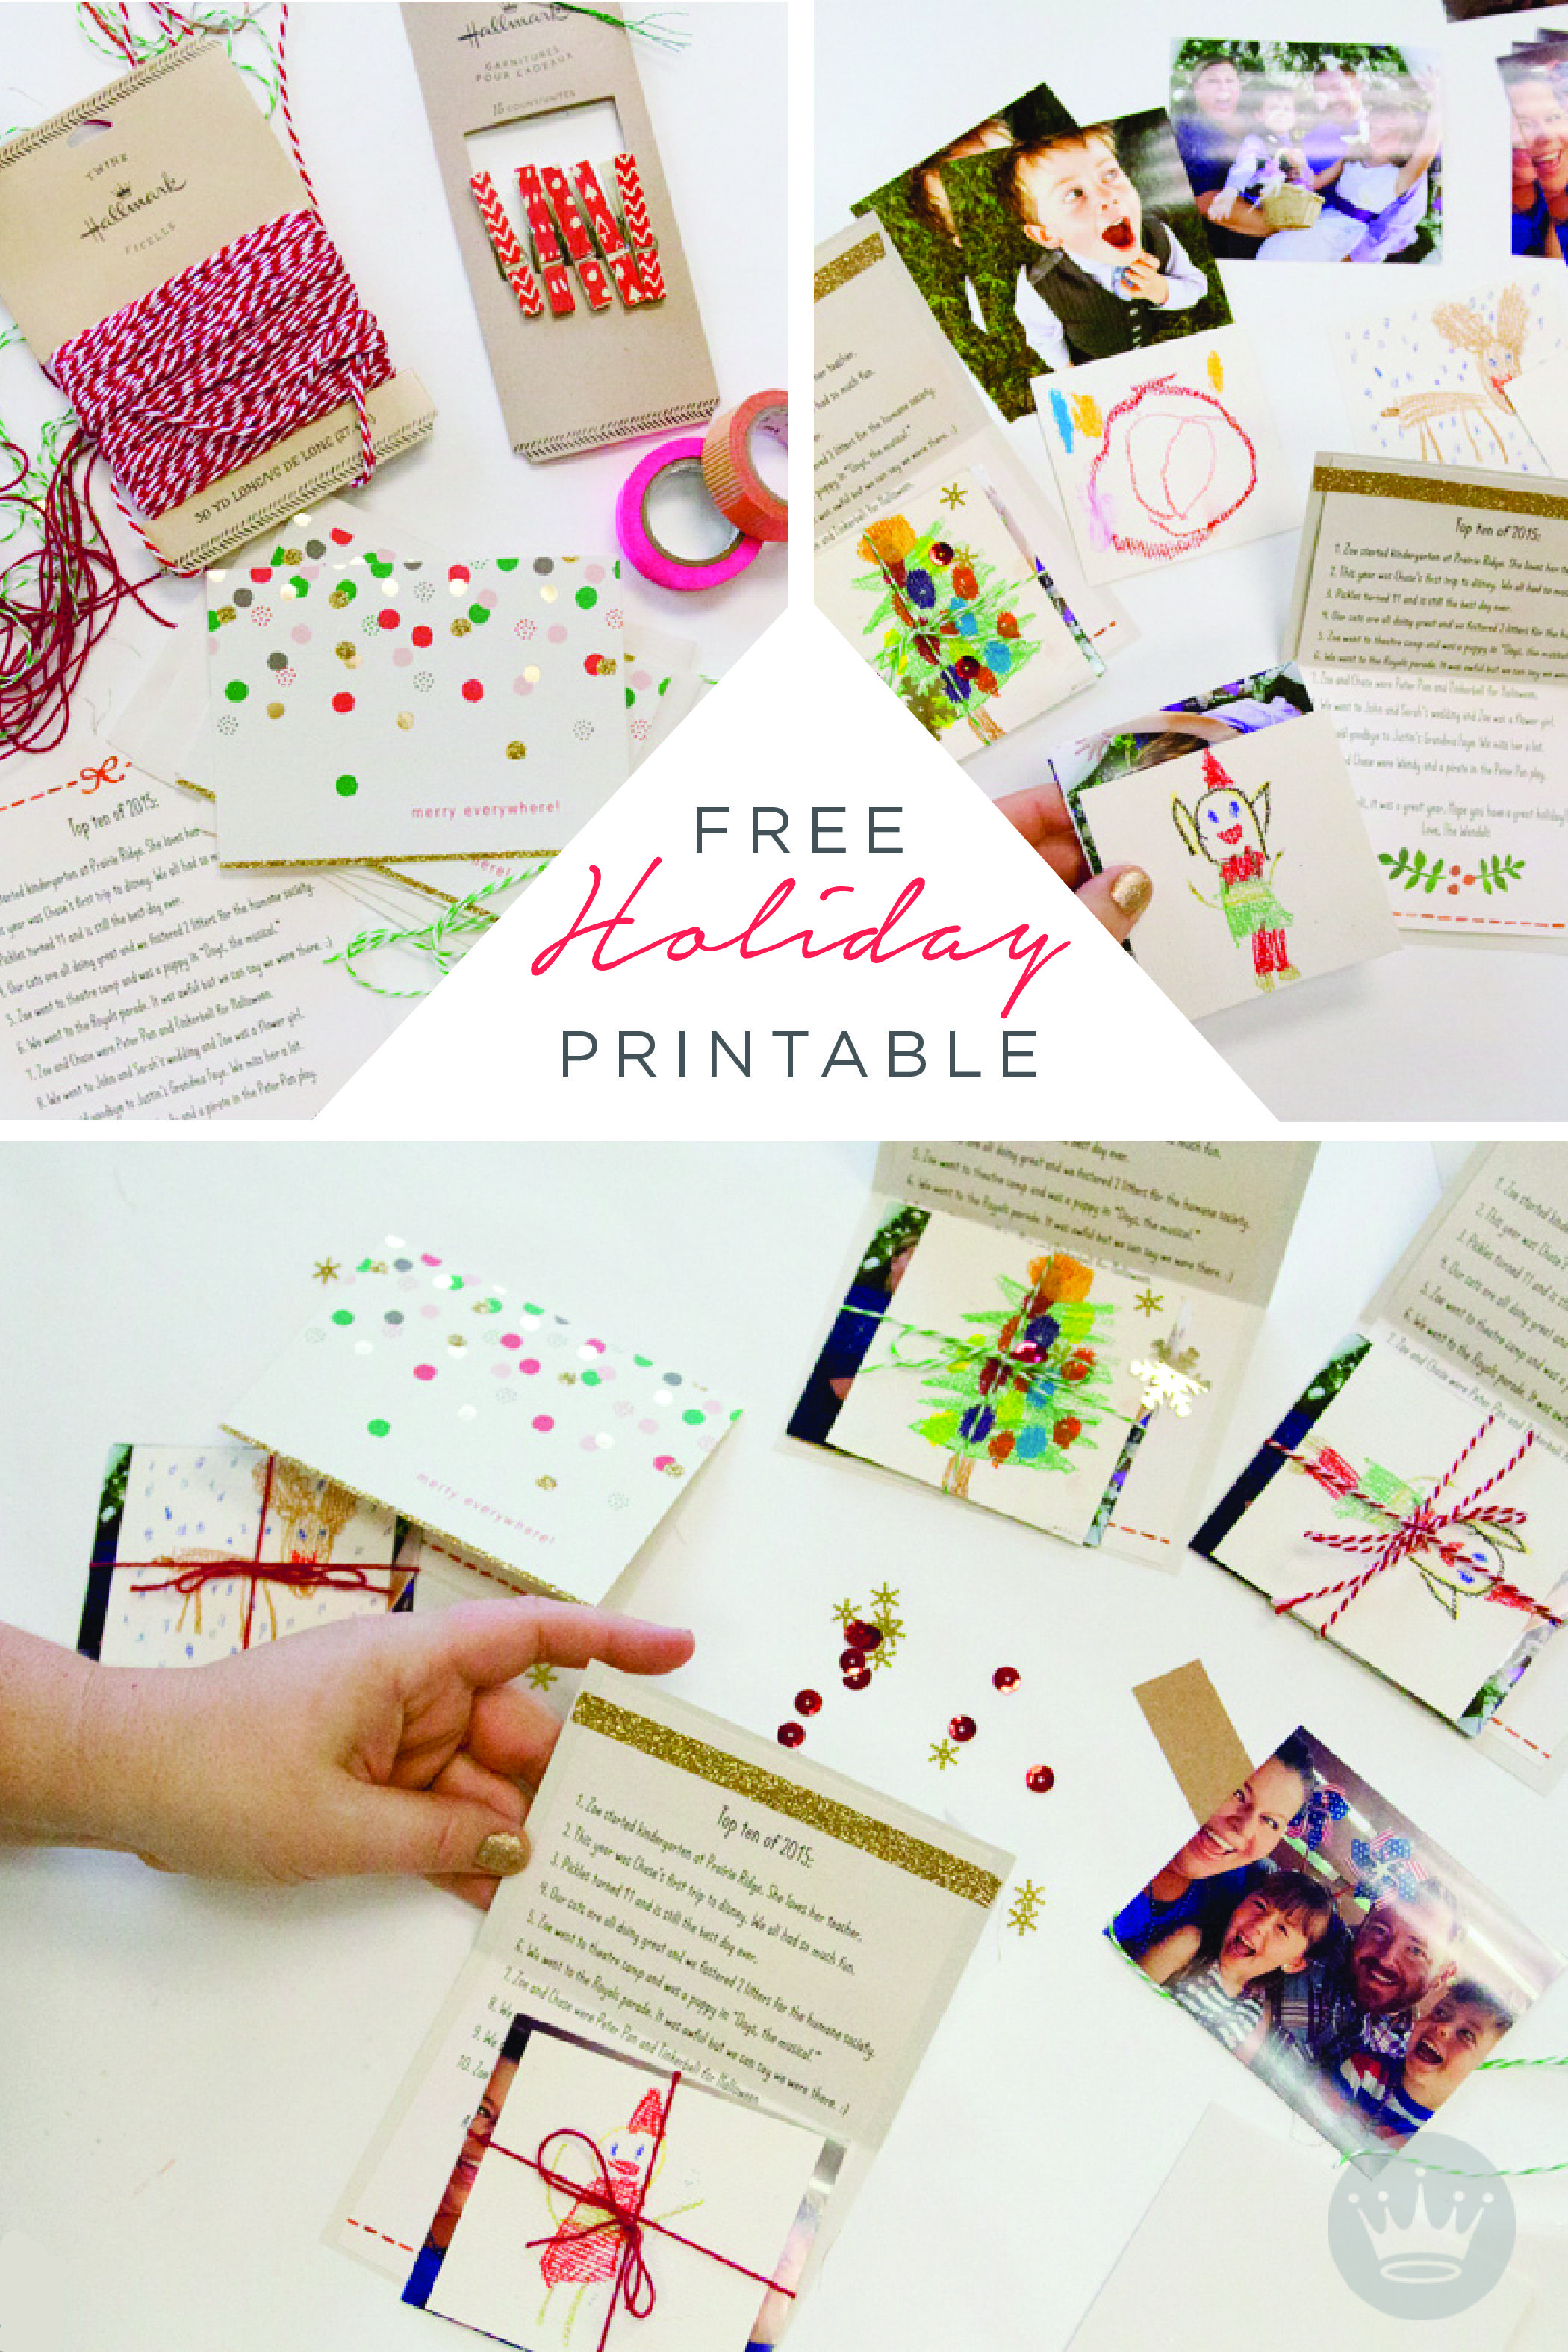 A Free Holiday Letter Printable To Dress Up Your Card-Sending | Home - Free Hallmark Christmas Cards Printable